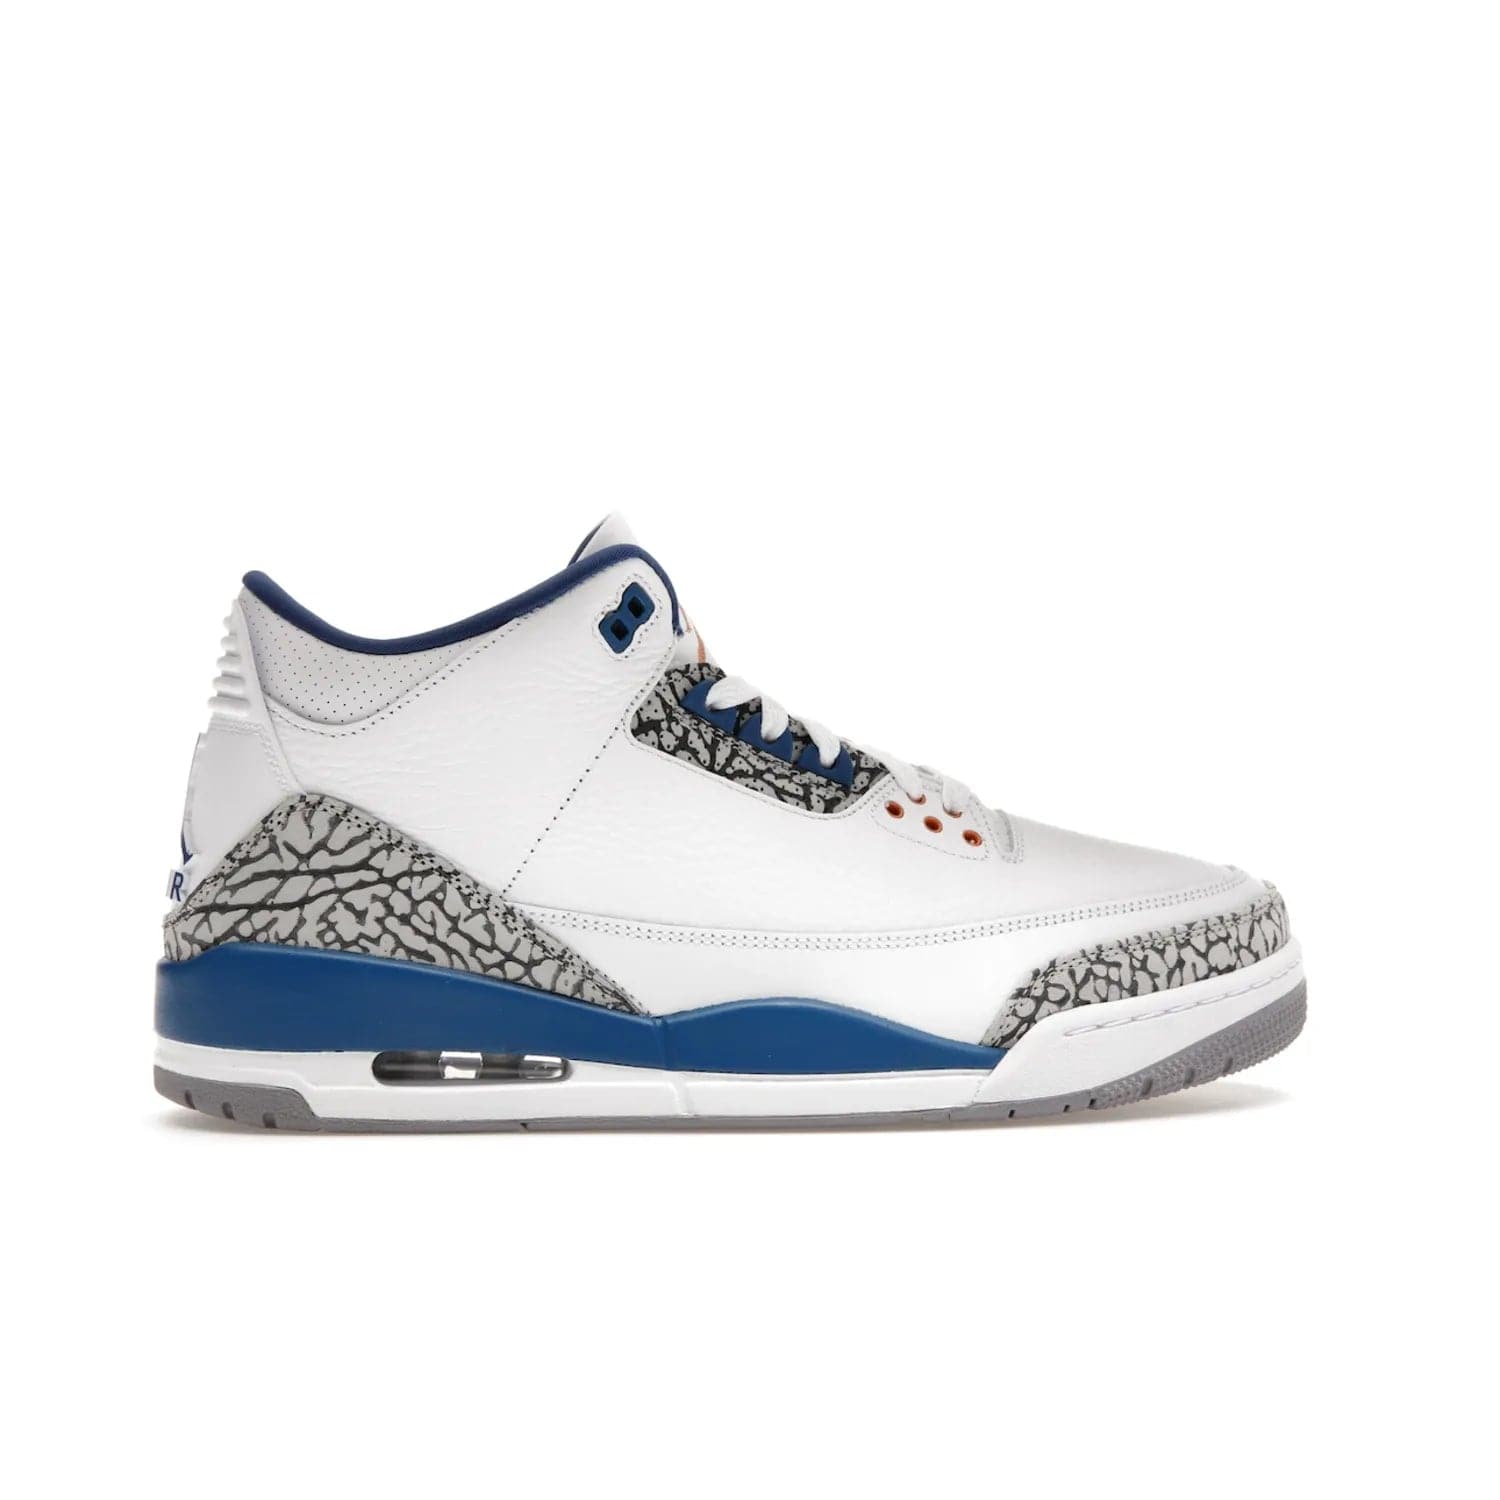 Jordan 3 Retro Wizards - Image 36 - Only at www.BallersClubKickz.com - ##
Special tribute sneaker from Jordan Brand to Michael Jordan's time with the Washington Wizards. Iconic white upper, orange Jumpman logo, blue accents, metallic copper details, and cement grey outsole. Buy the Air Jordan 3 Retro Wizards April 29, 2023.